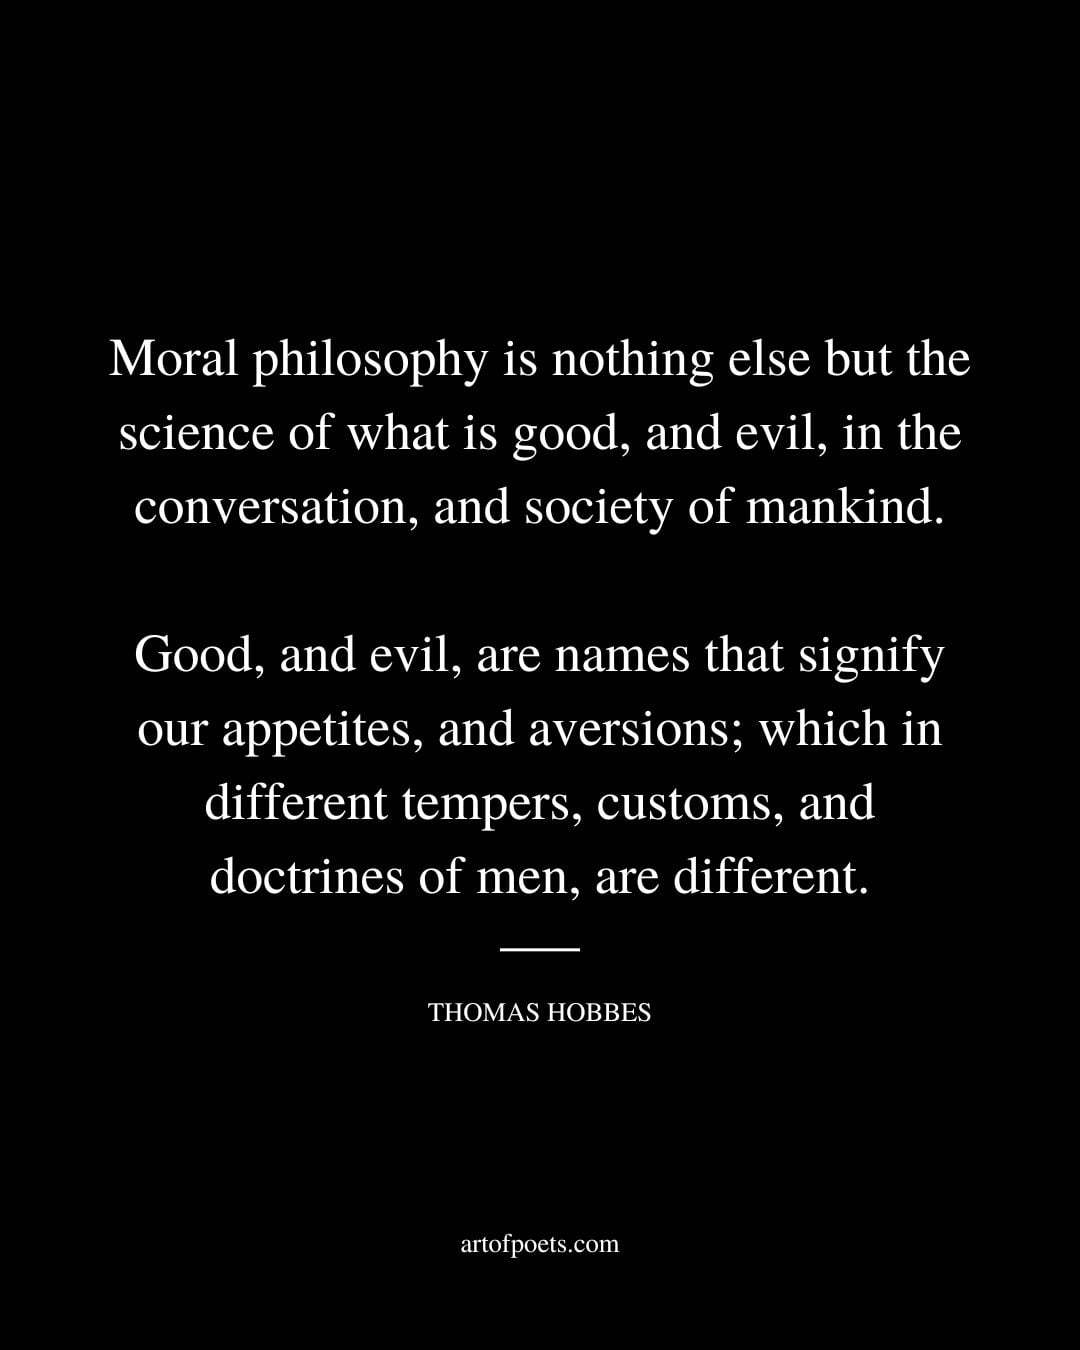 Moral philosophy is nothing else but the science of what is good and evil in the conversation and society of mankind 1